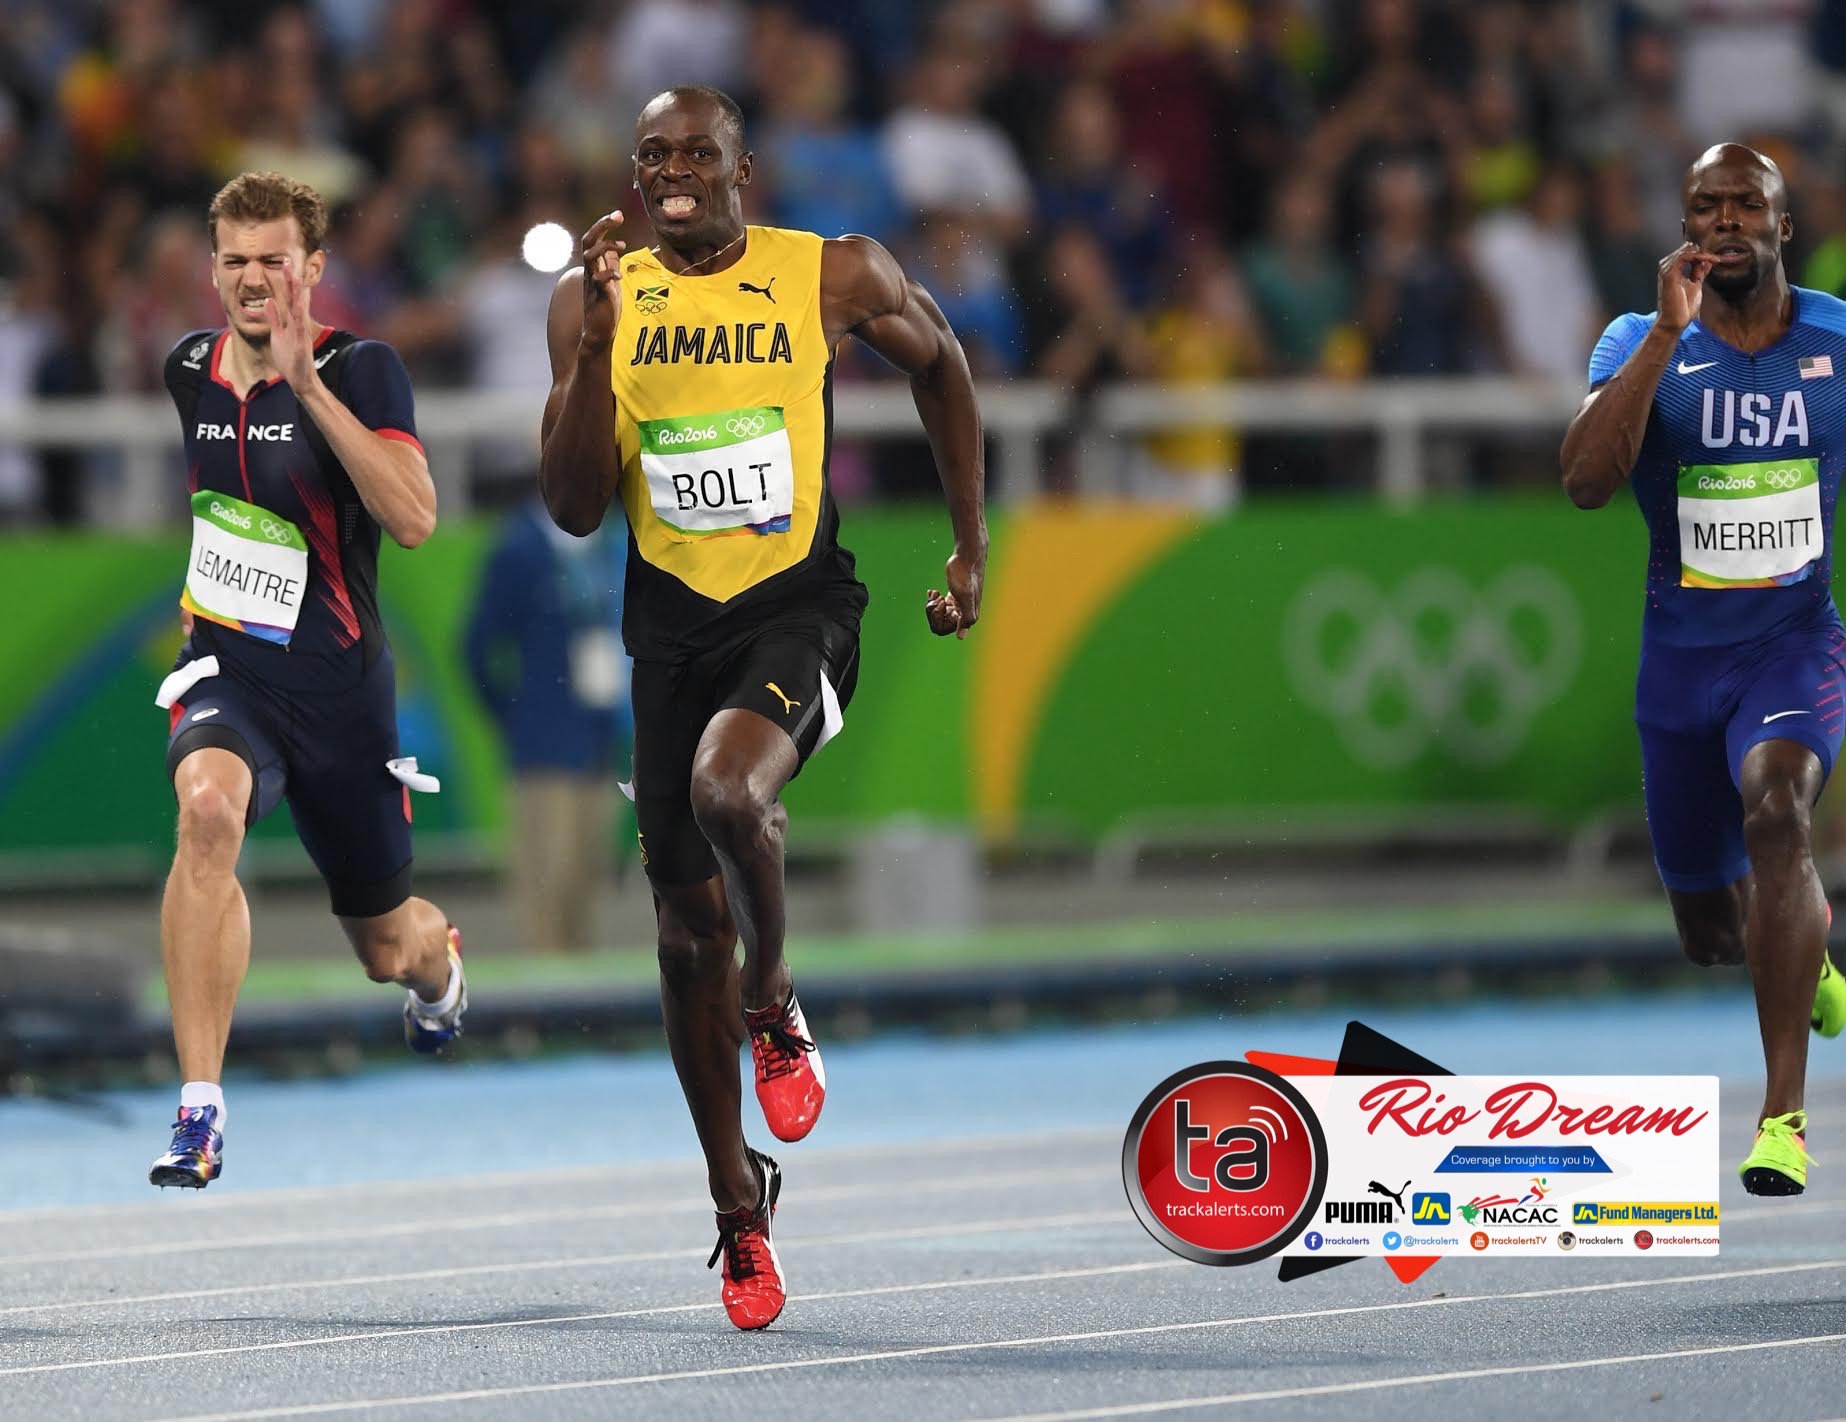 Who is the icon of thes ‘iconic’ Games? Bolt, of course